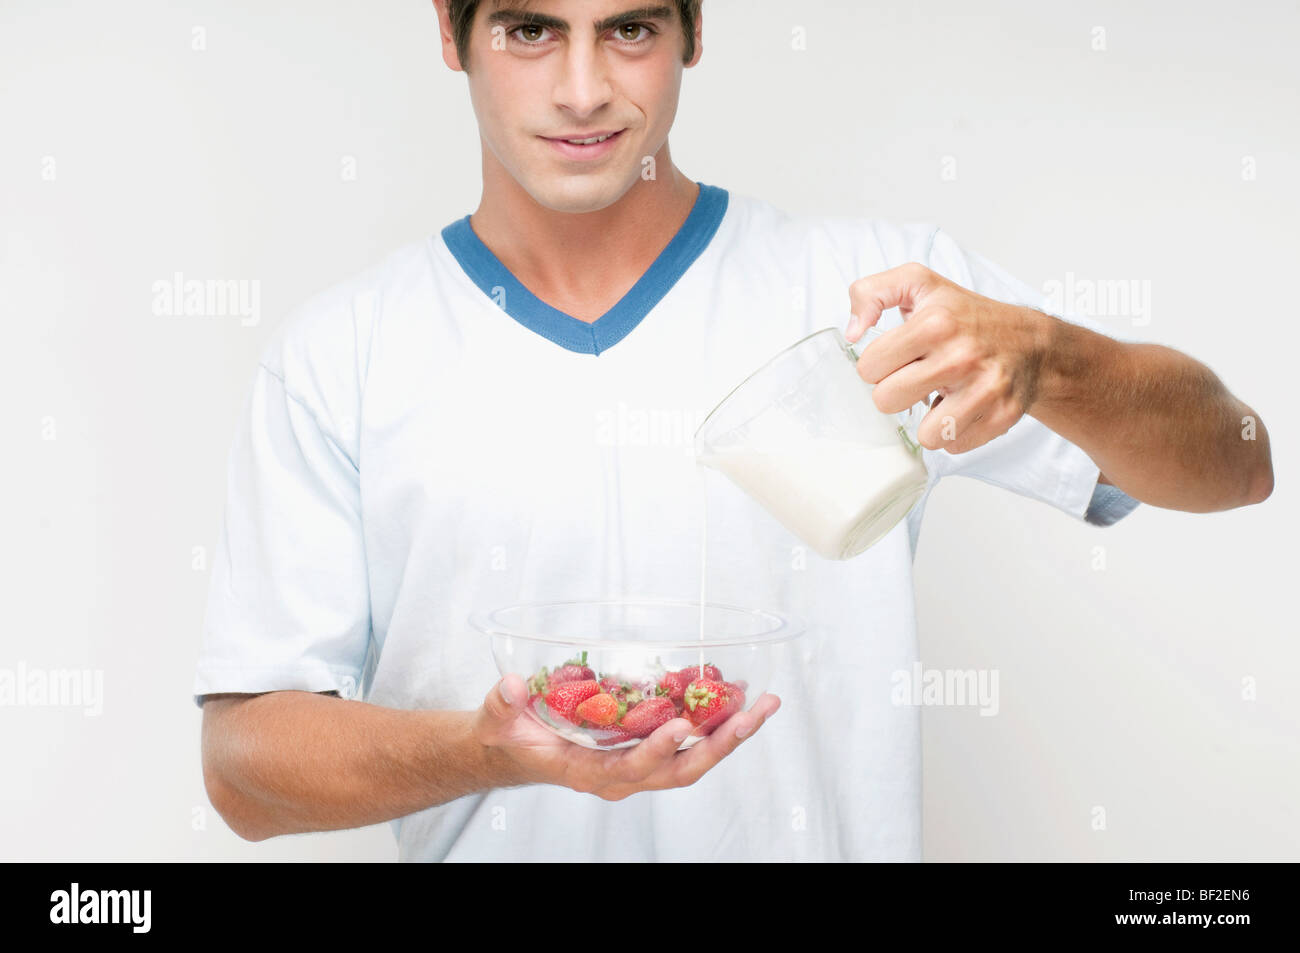 Portrait of a man pouring milk on strawberries Stock Photo